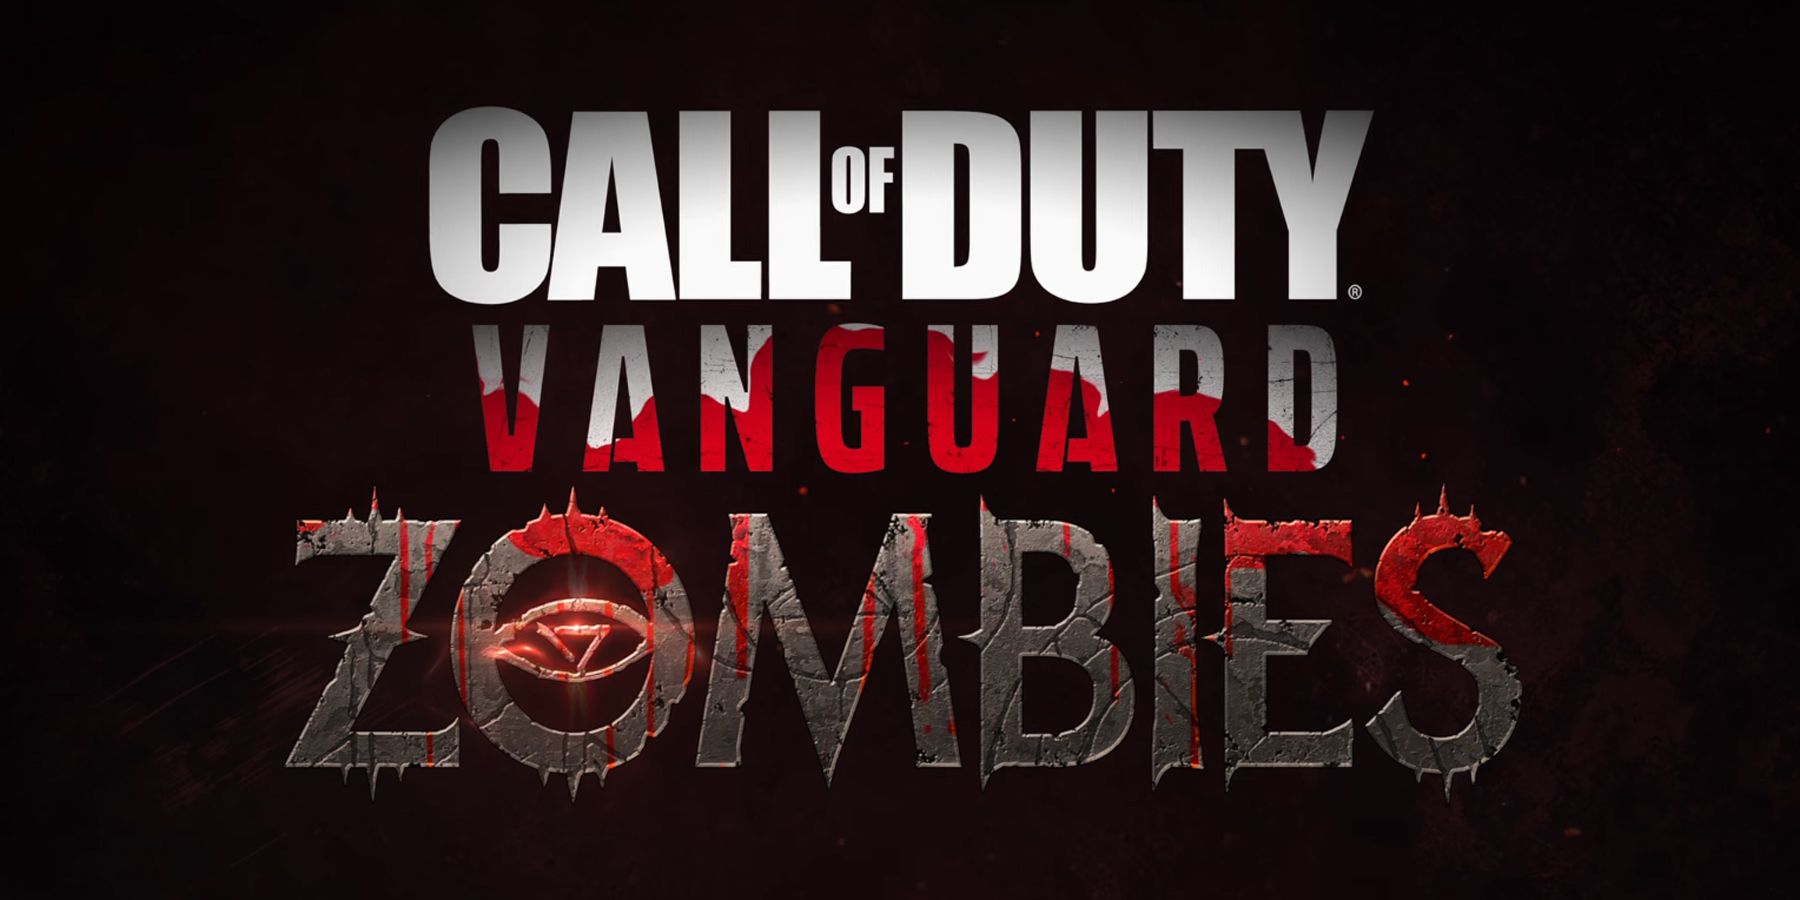 Call of Duty: Vanguard Zombies title